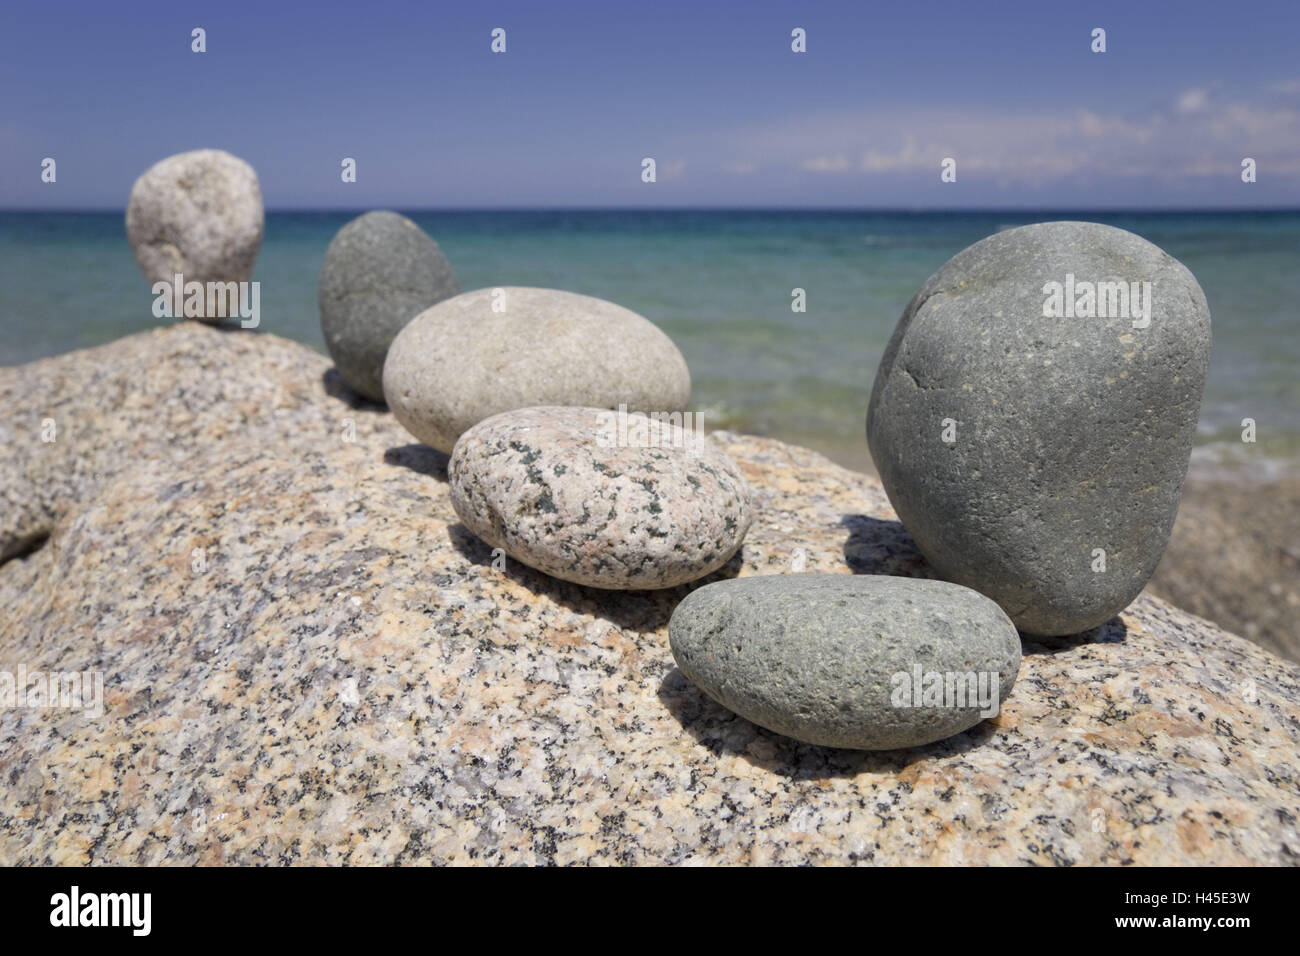 Granite rocks, stones, raised, lie, conception, balance, balance, rock, granite, geology, Around, pebbles, unison, forms, harmony, nature, bile lump, stacked, country kind, nature forms, detail, rest, Zen, icon, esotericism, balance, hardness, stability, lability, Stock Photo